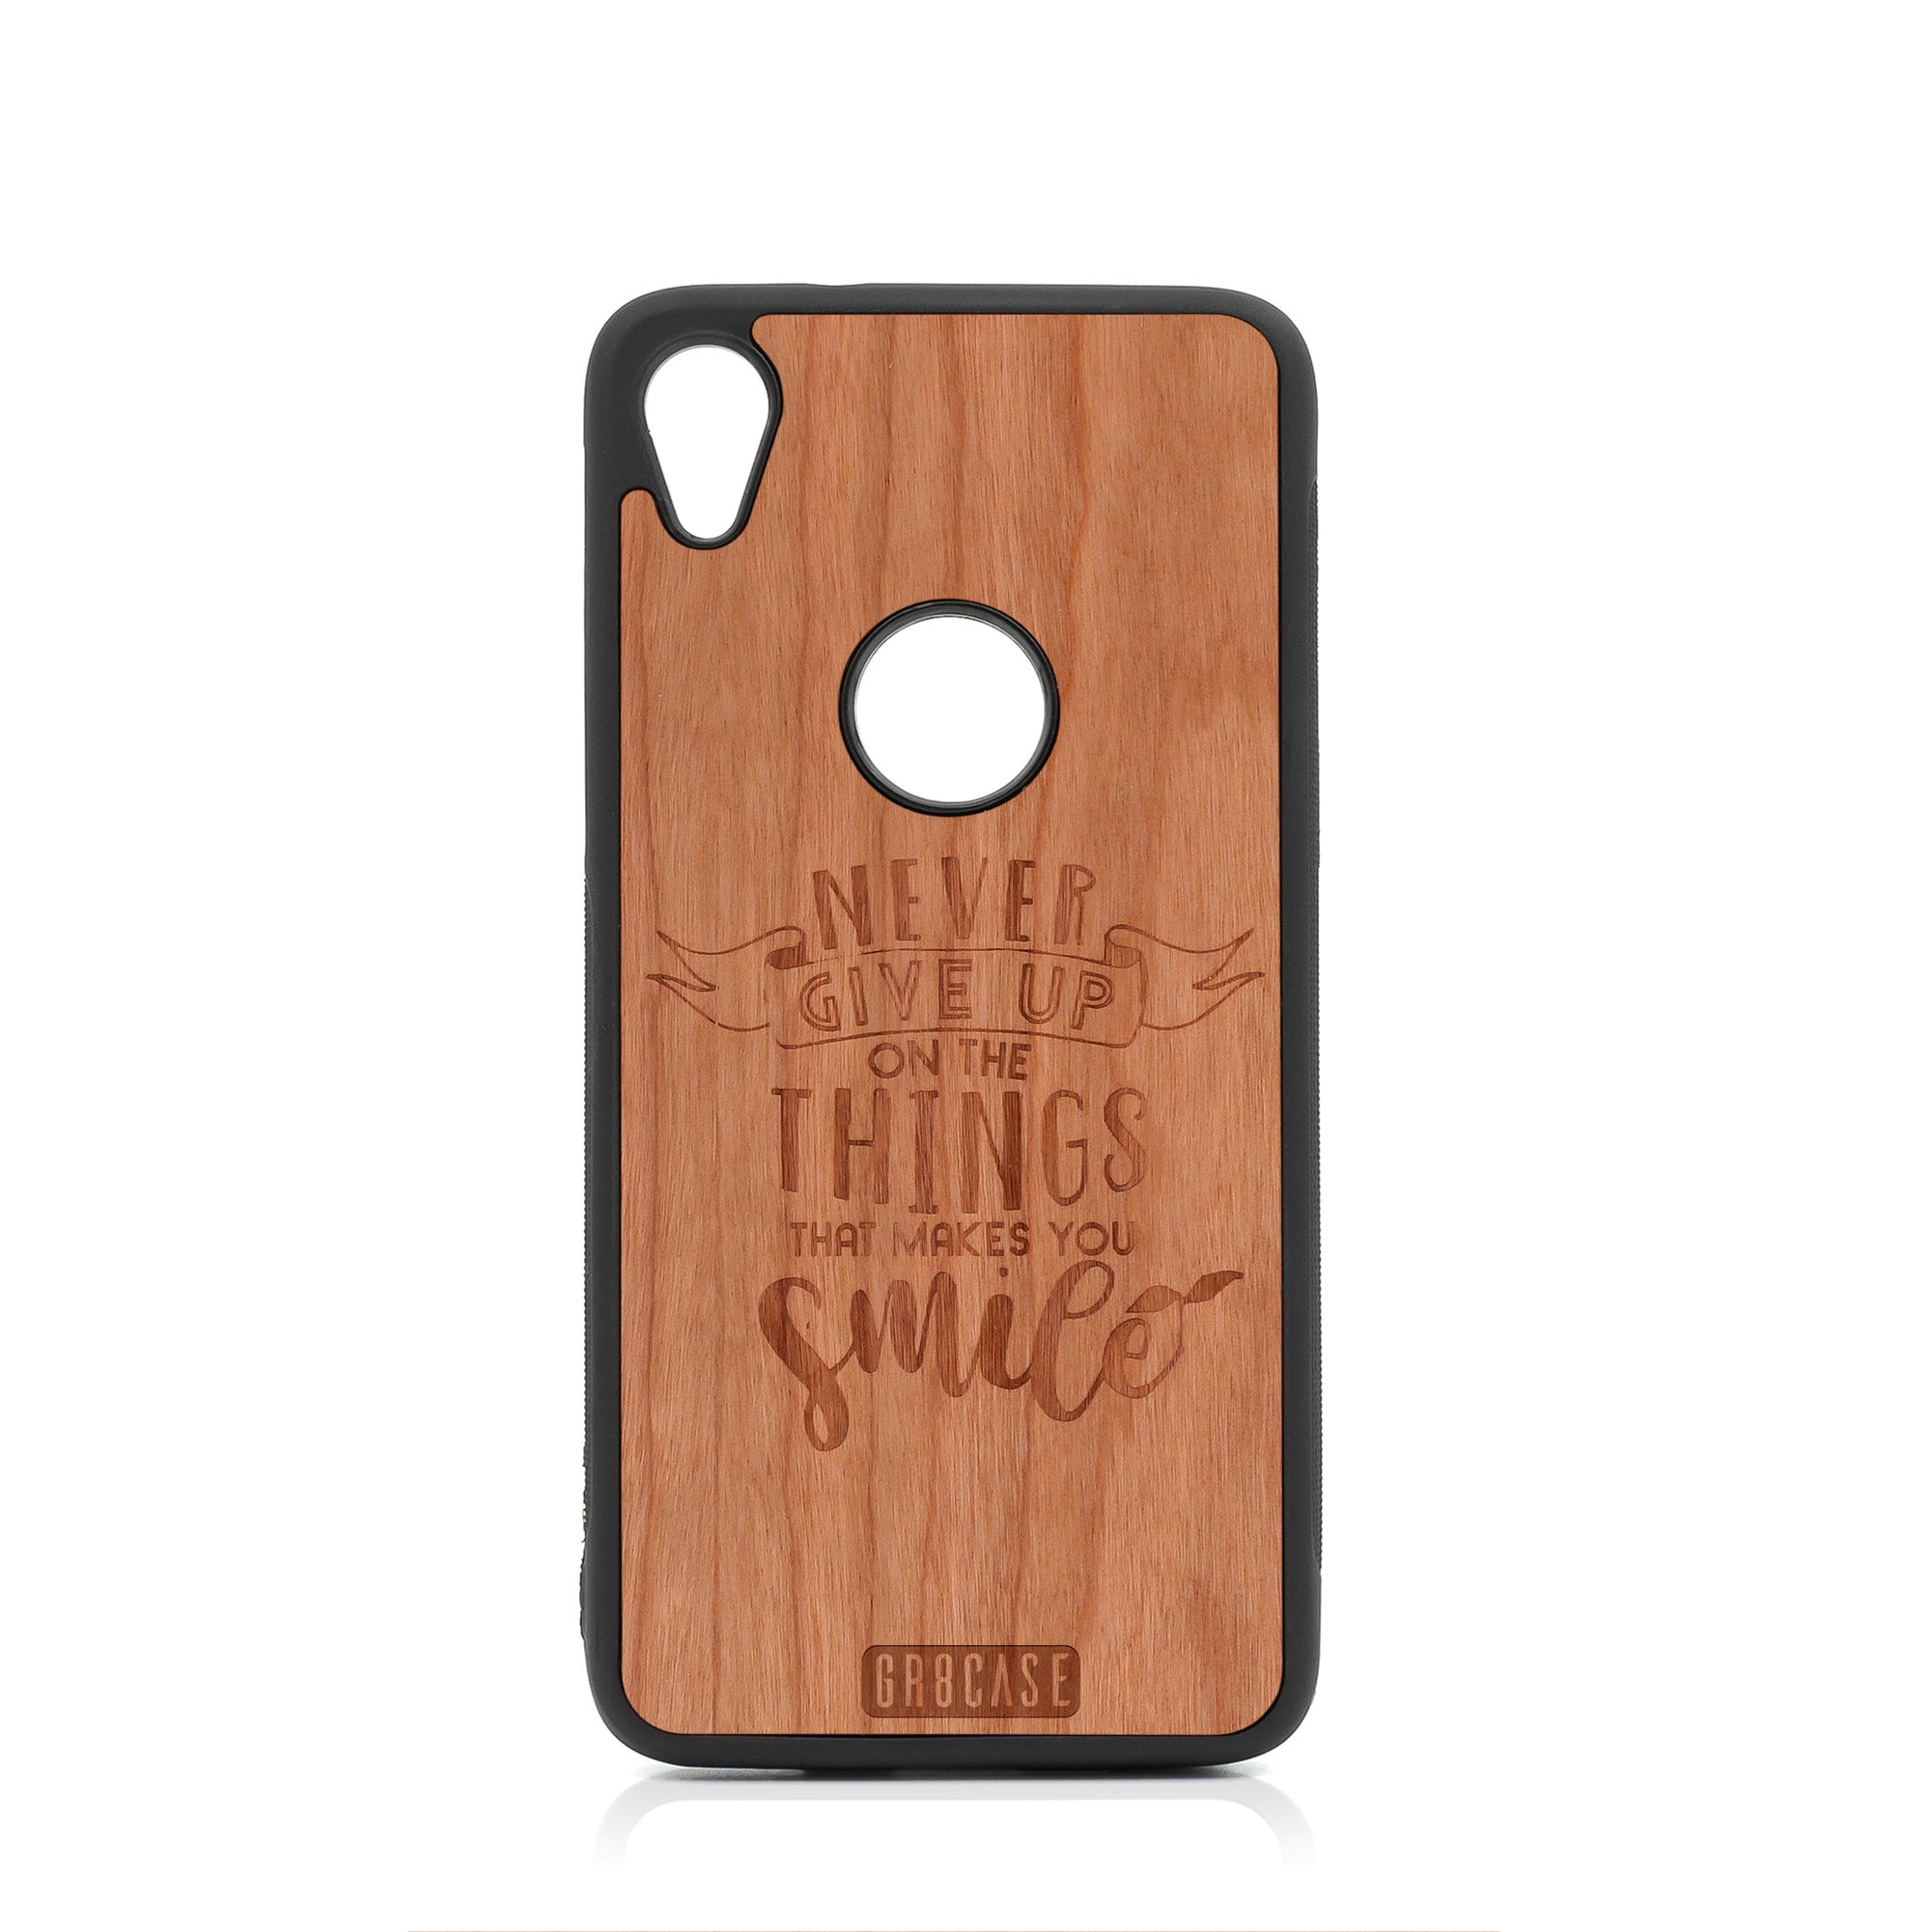 Never Give Up On The Things That Makes You Smile Design Wood Case For Moto E6 by GR8CASE